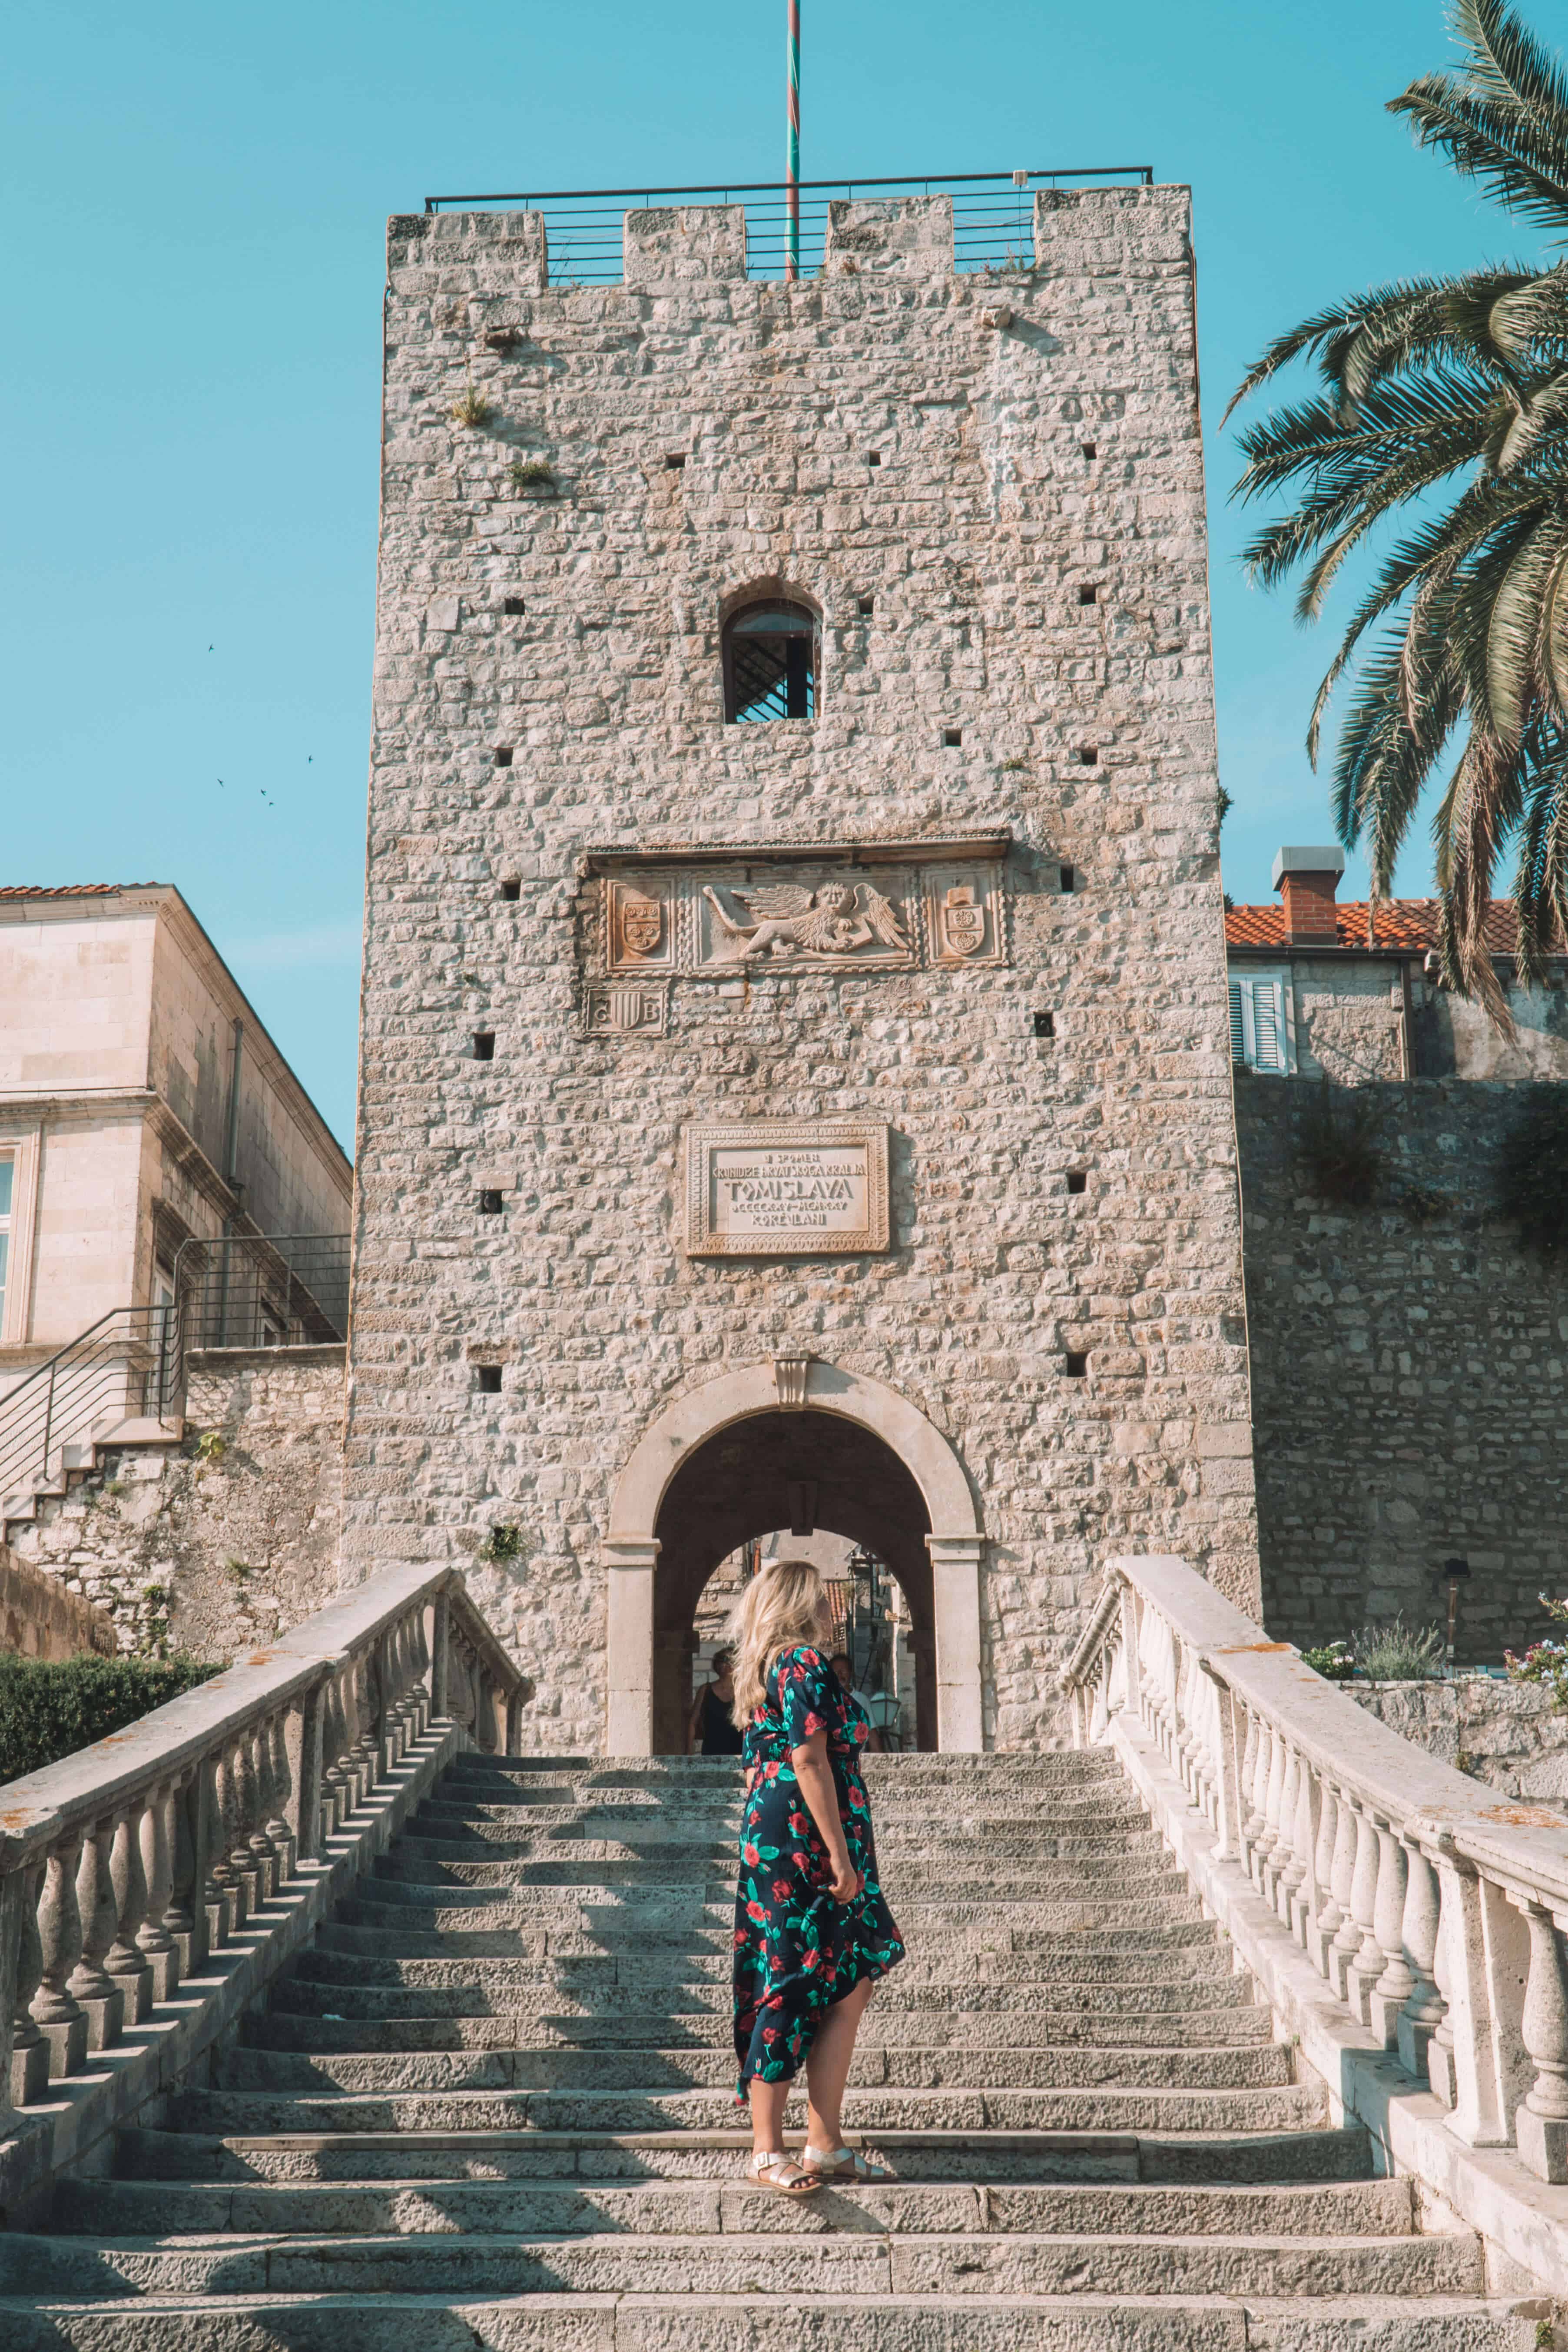 HOW TO SPEND ONE DAY IN KORCULA, CROATIA | Korcula Old Town Gate Entrance | The Republic of Rose